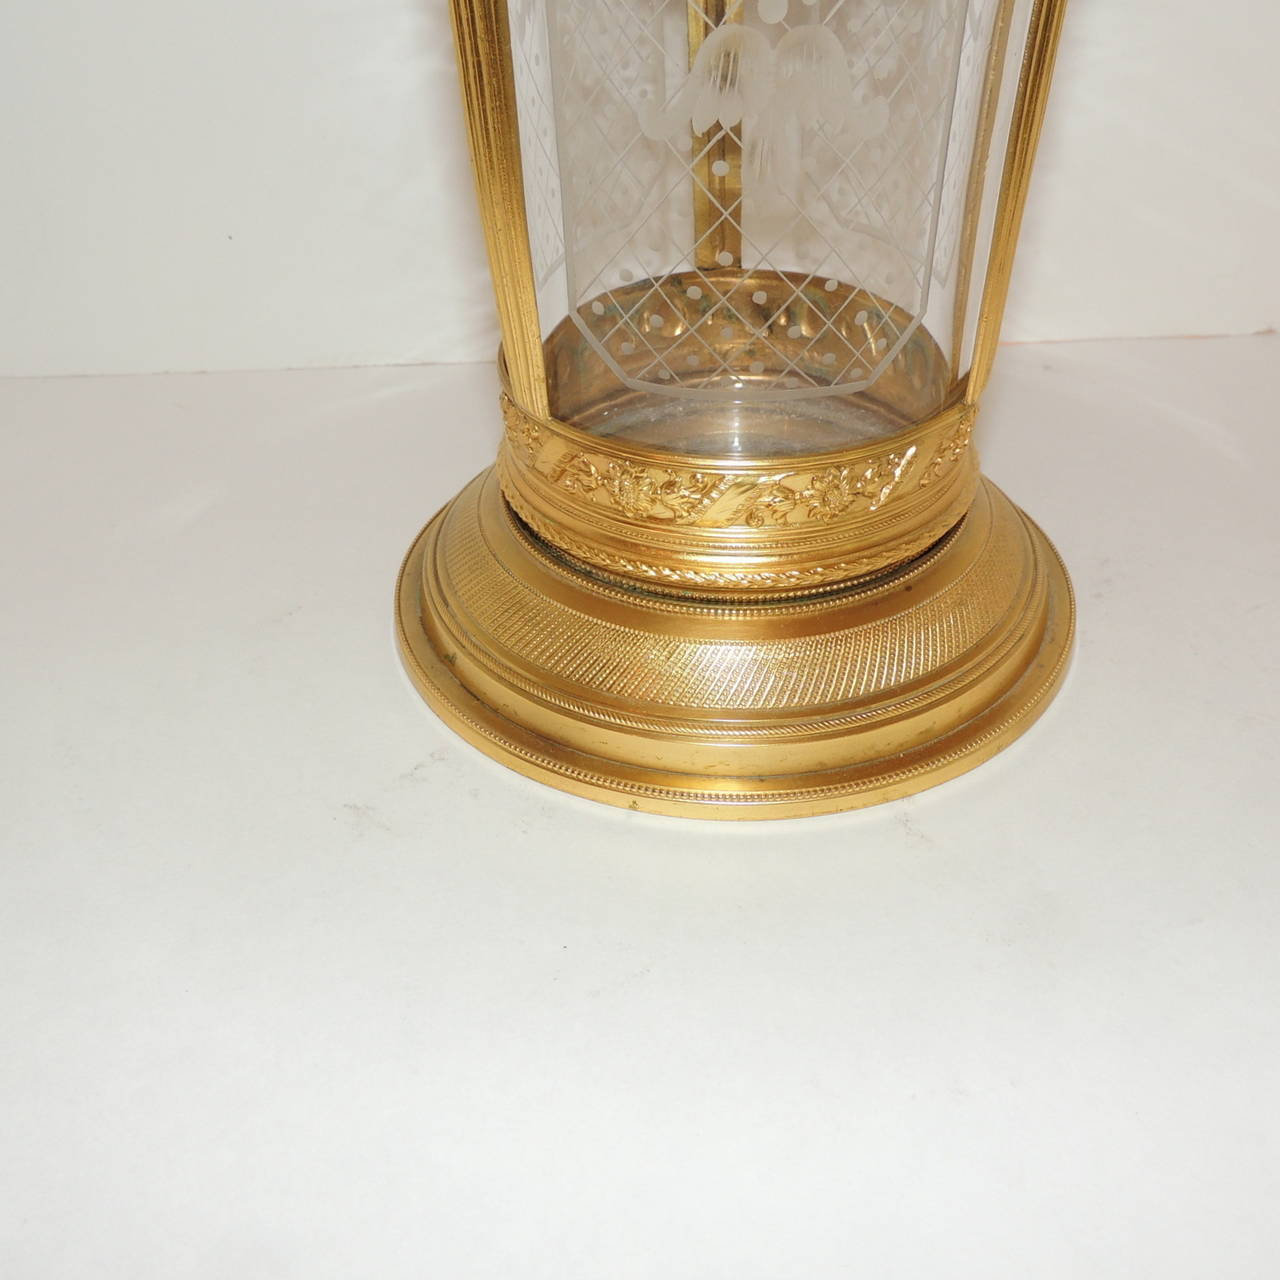 Early 20th Century Wonderful French Dore Bronze Ormolu Mounted and Etched Crystal Vase Centerpiece